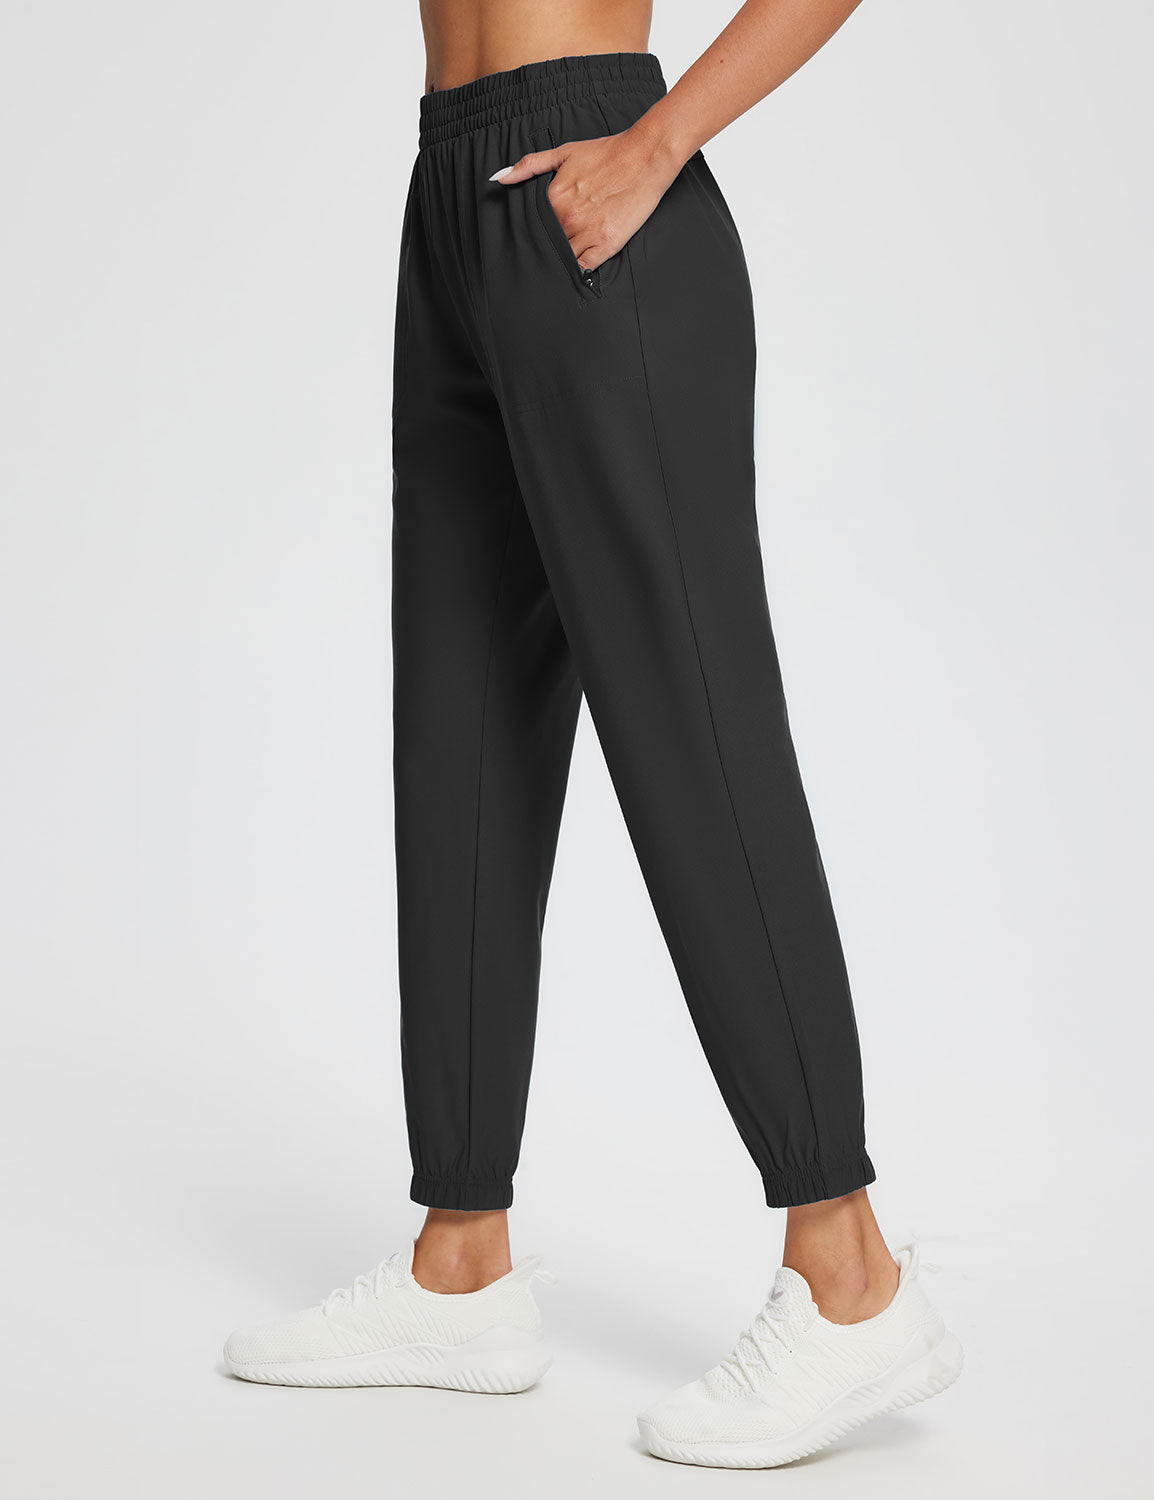 Baleaf Women's Laureate Quick-Dry Lightweight Joggers ebd003 Anthracite Side